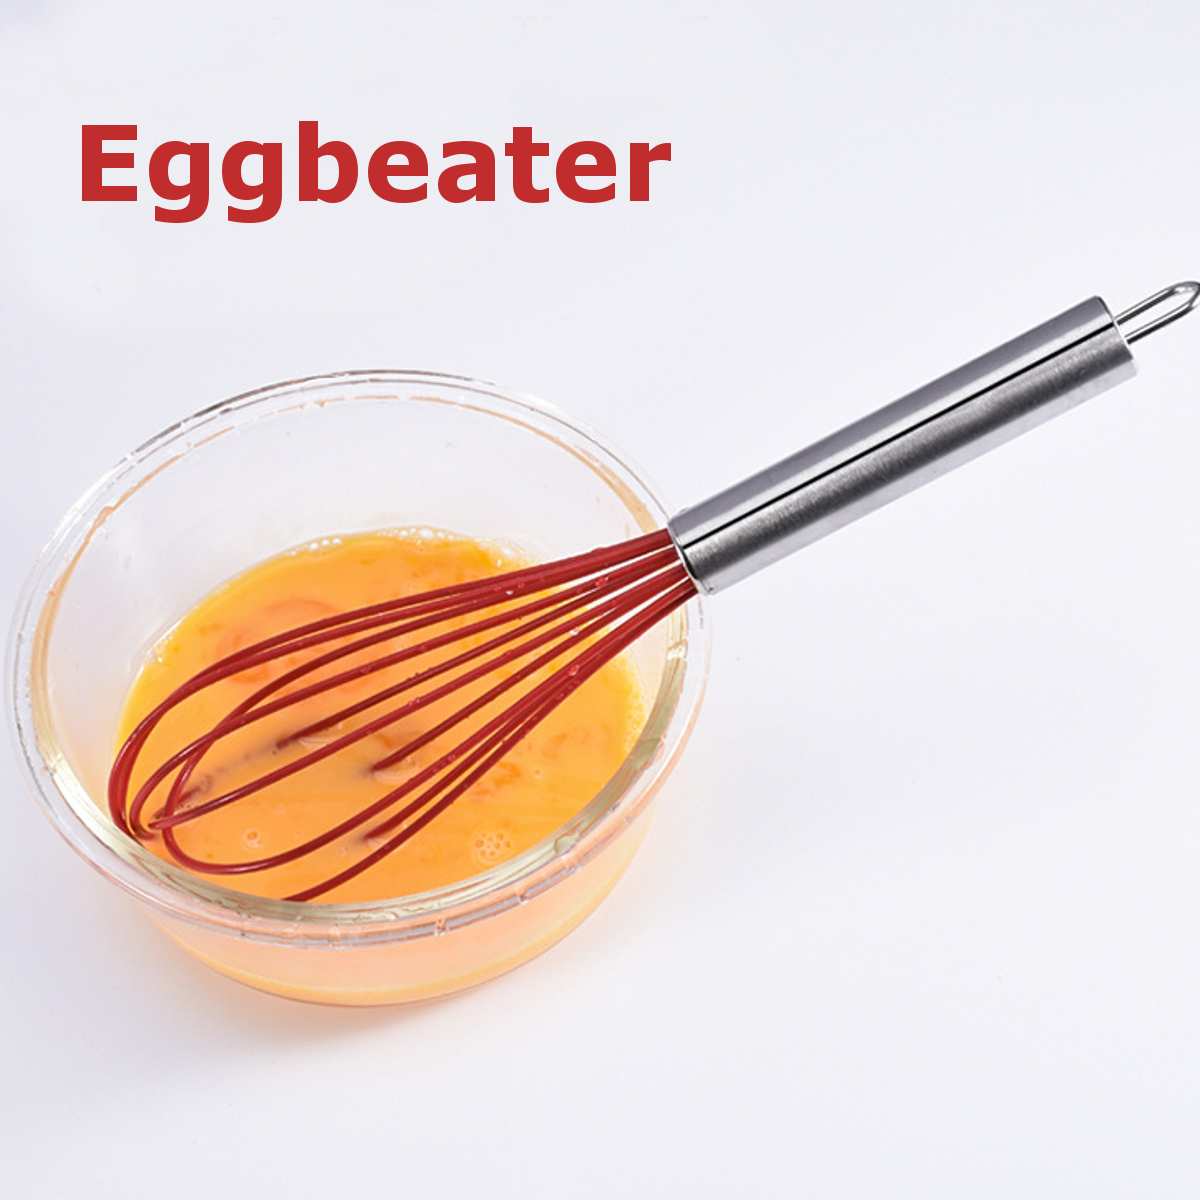 Silicone Cooking Utensils Wooden Handle Kitchen Set Cooking Tools Sets Accessories with Stainless Steel Storage Box